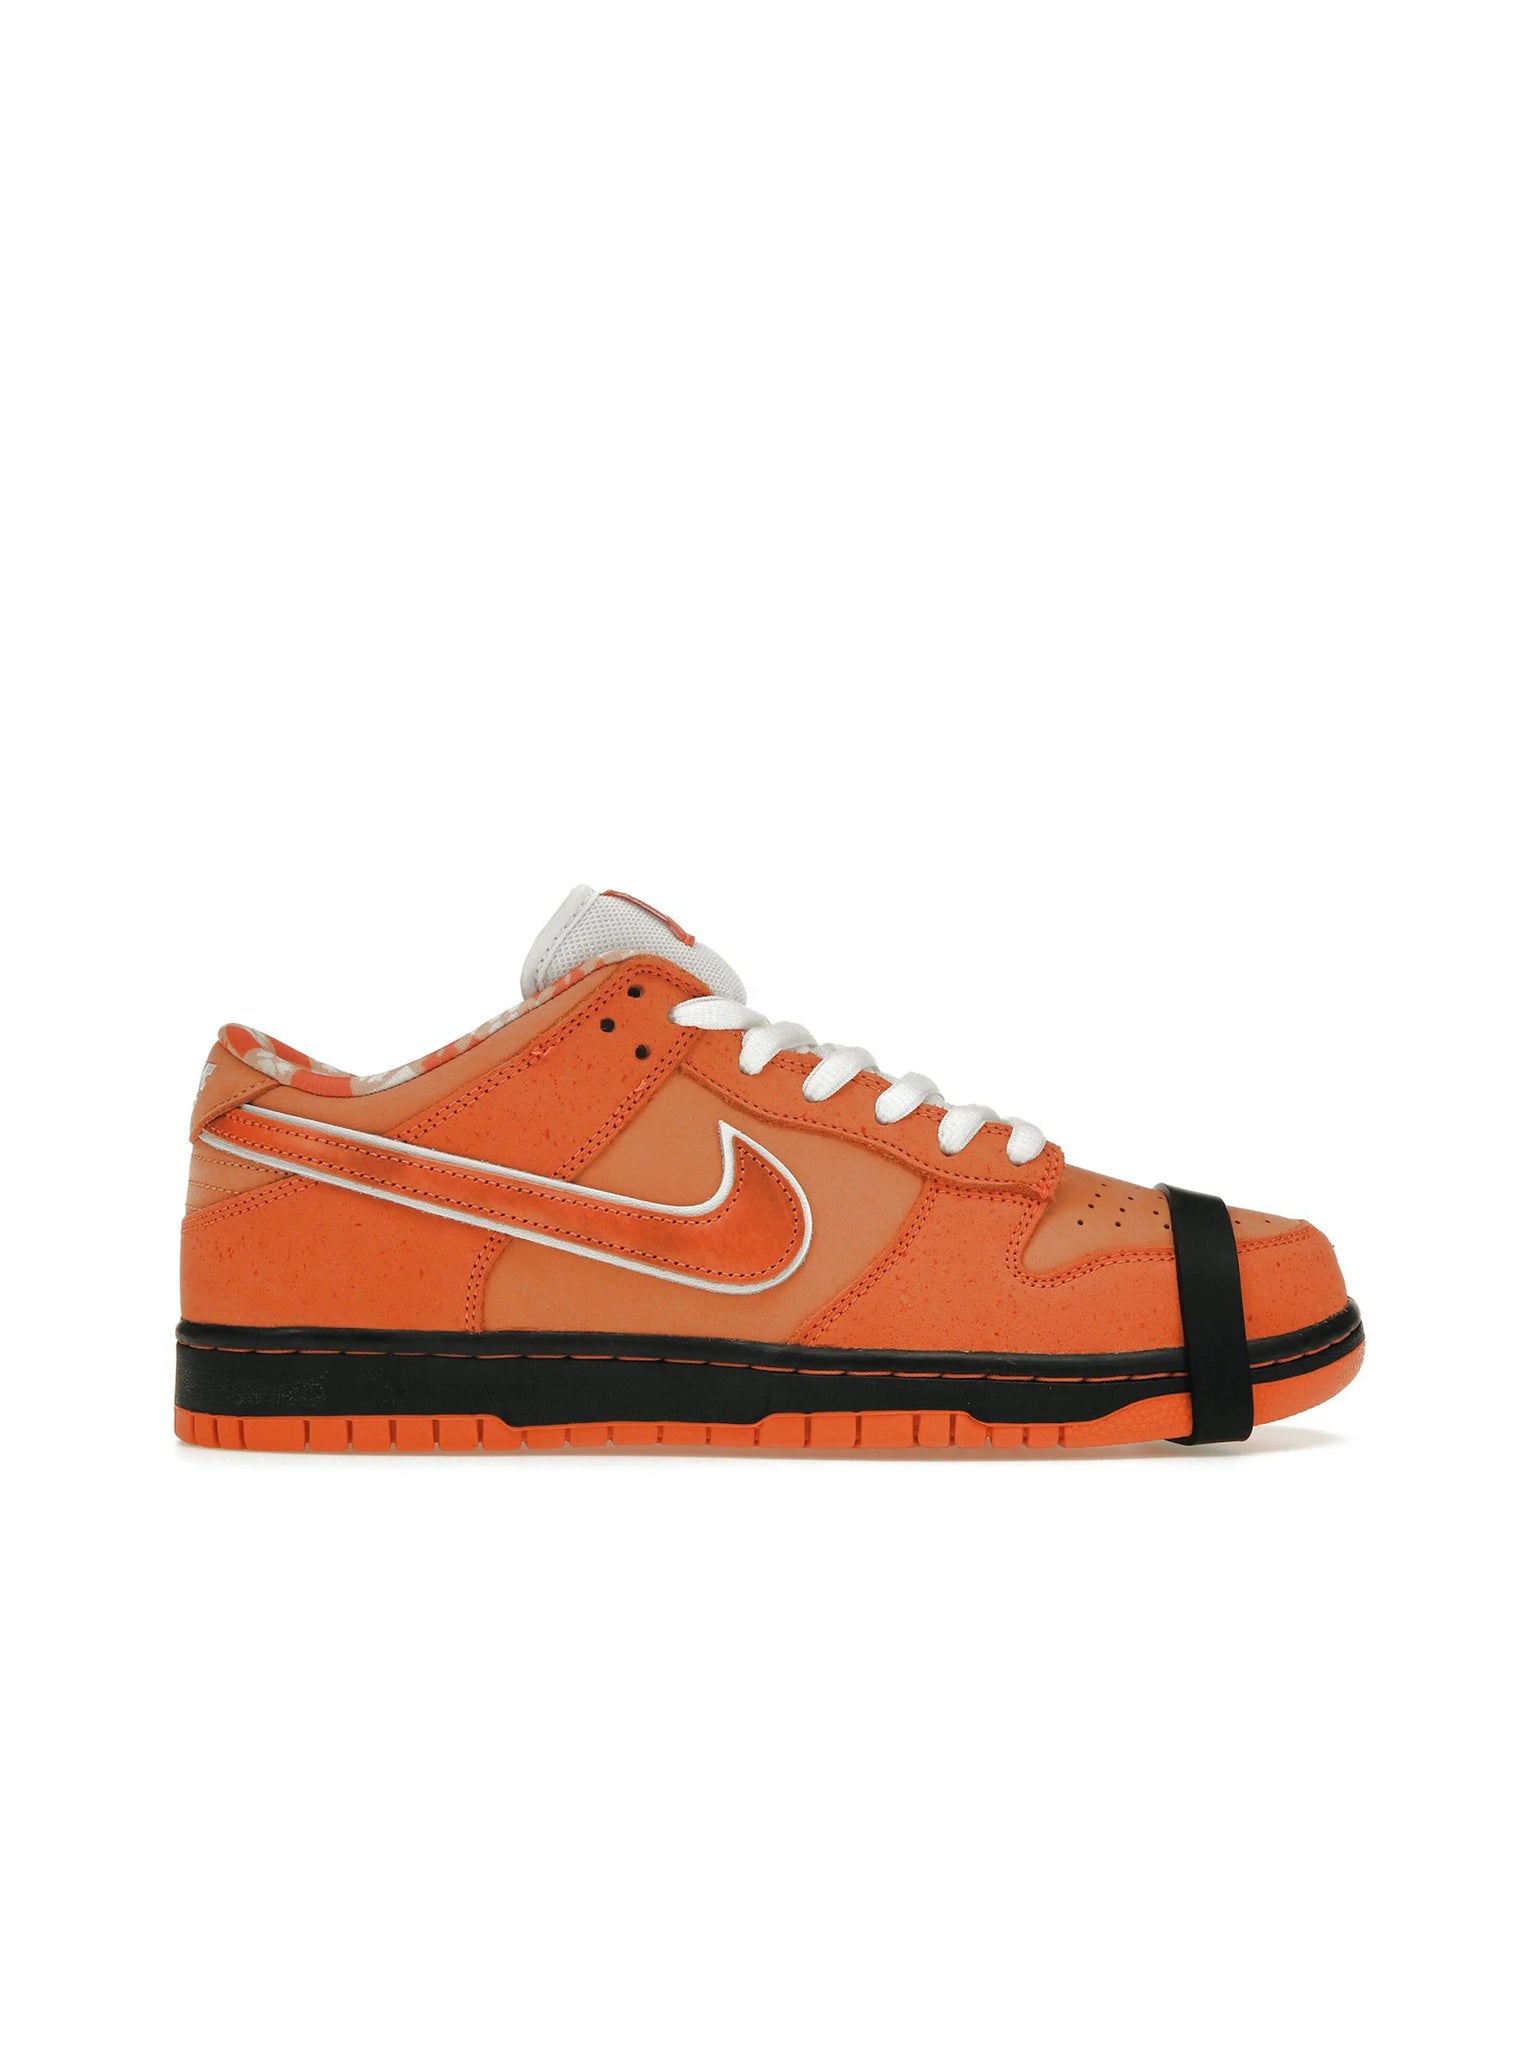 Nike SB Dunk Low Concepts Orange Lobster in Auckland, New Zealand - Shop name